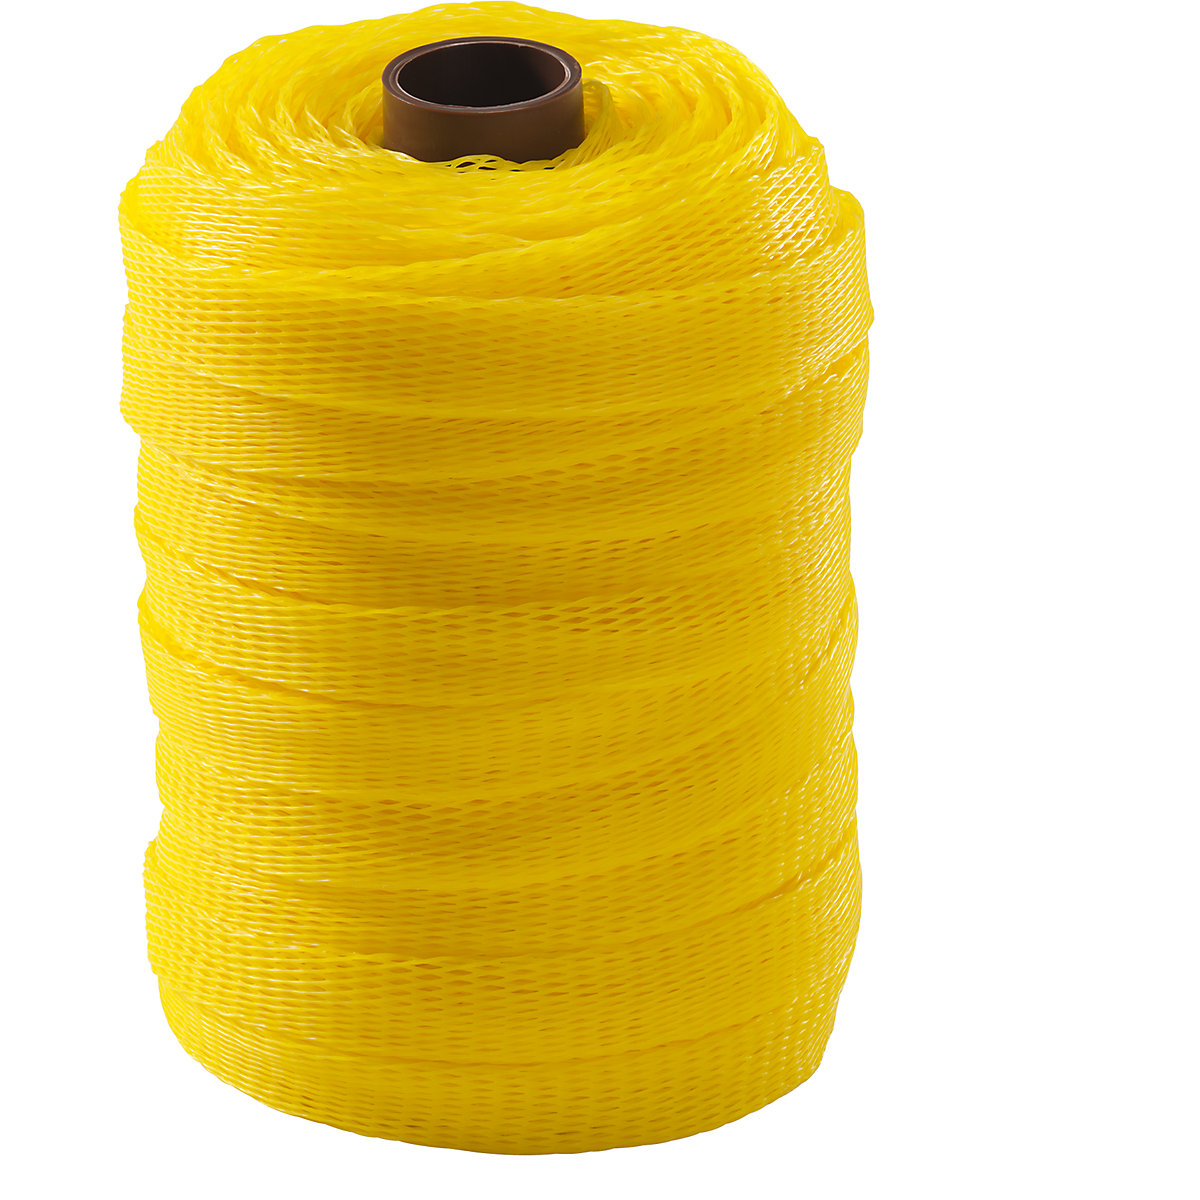 Surface protection net, polyethylene, 1 roll, yellow, for Ø 25 – 50 mm